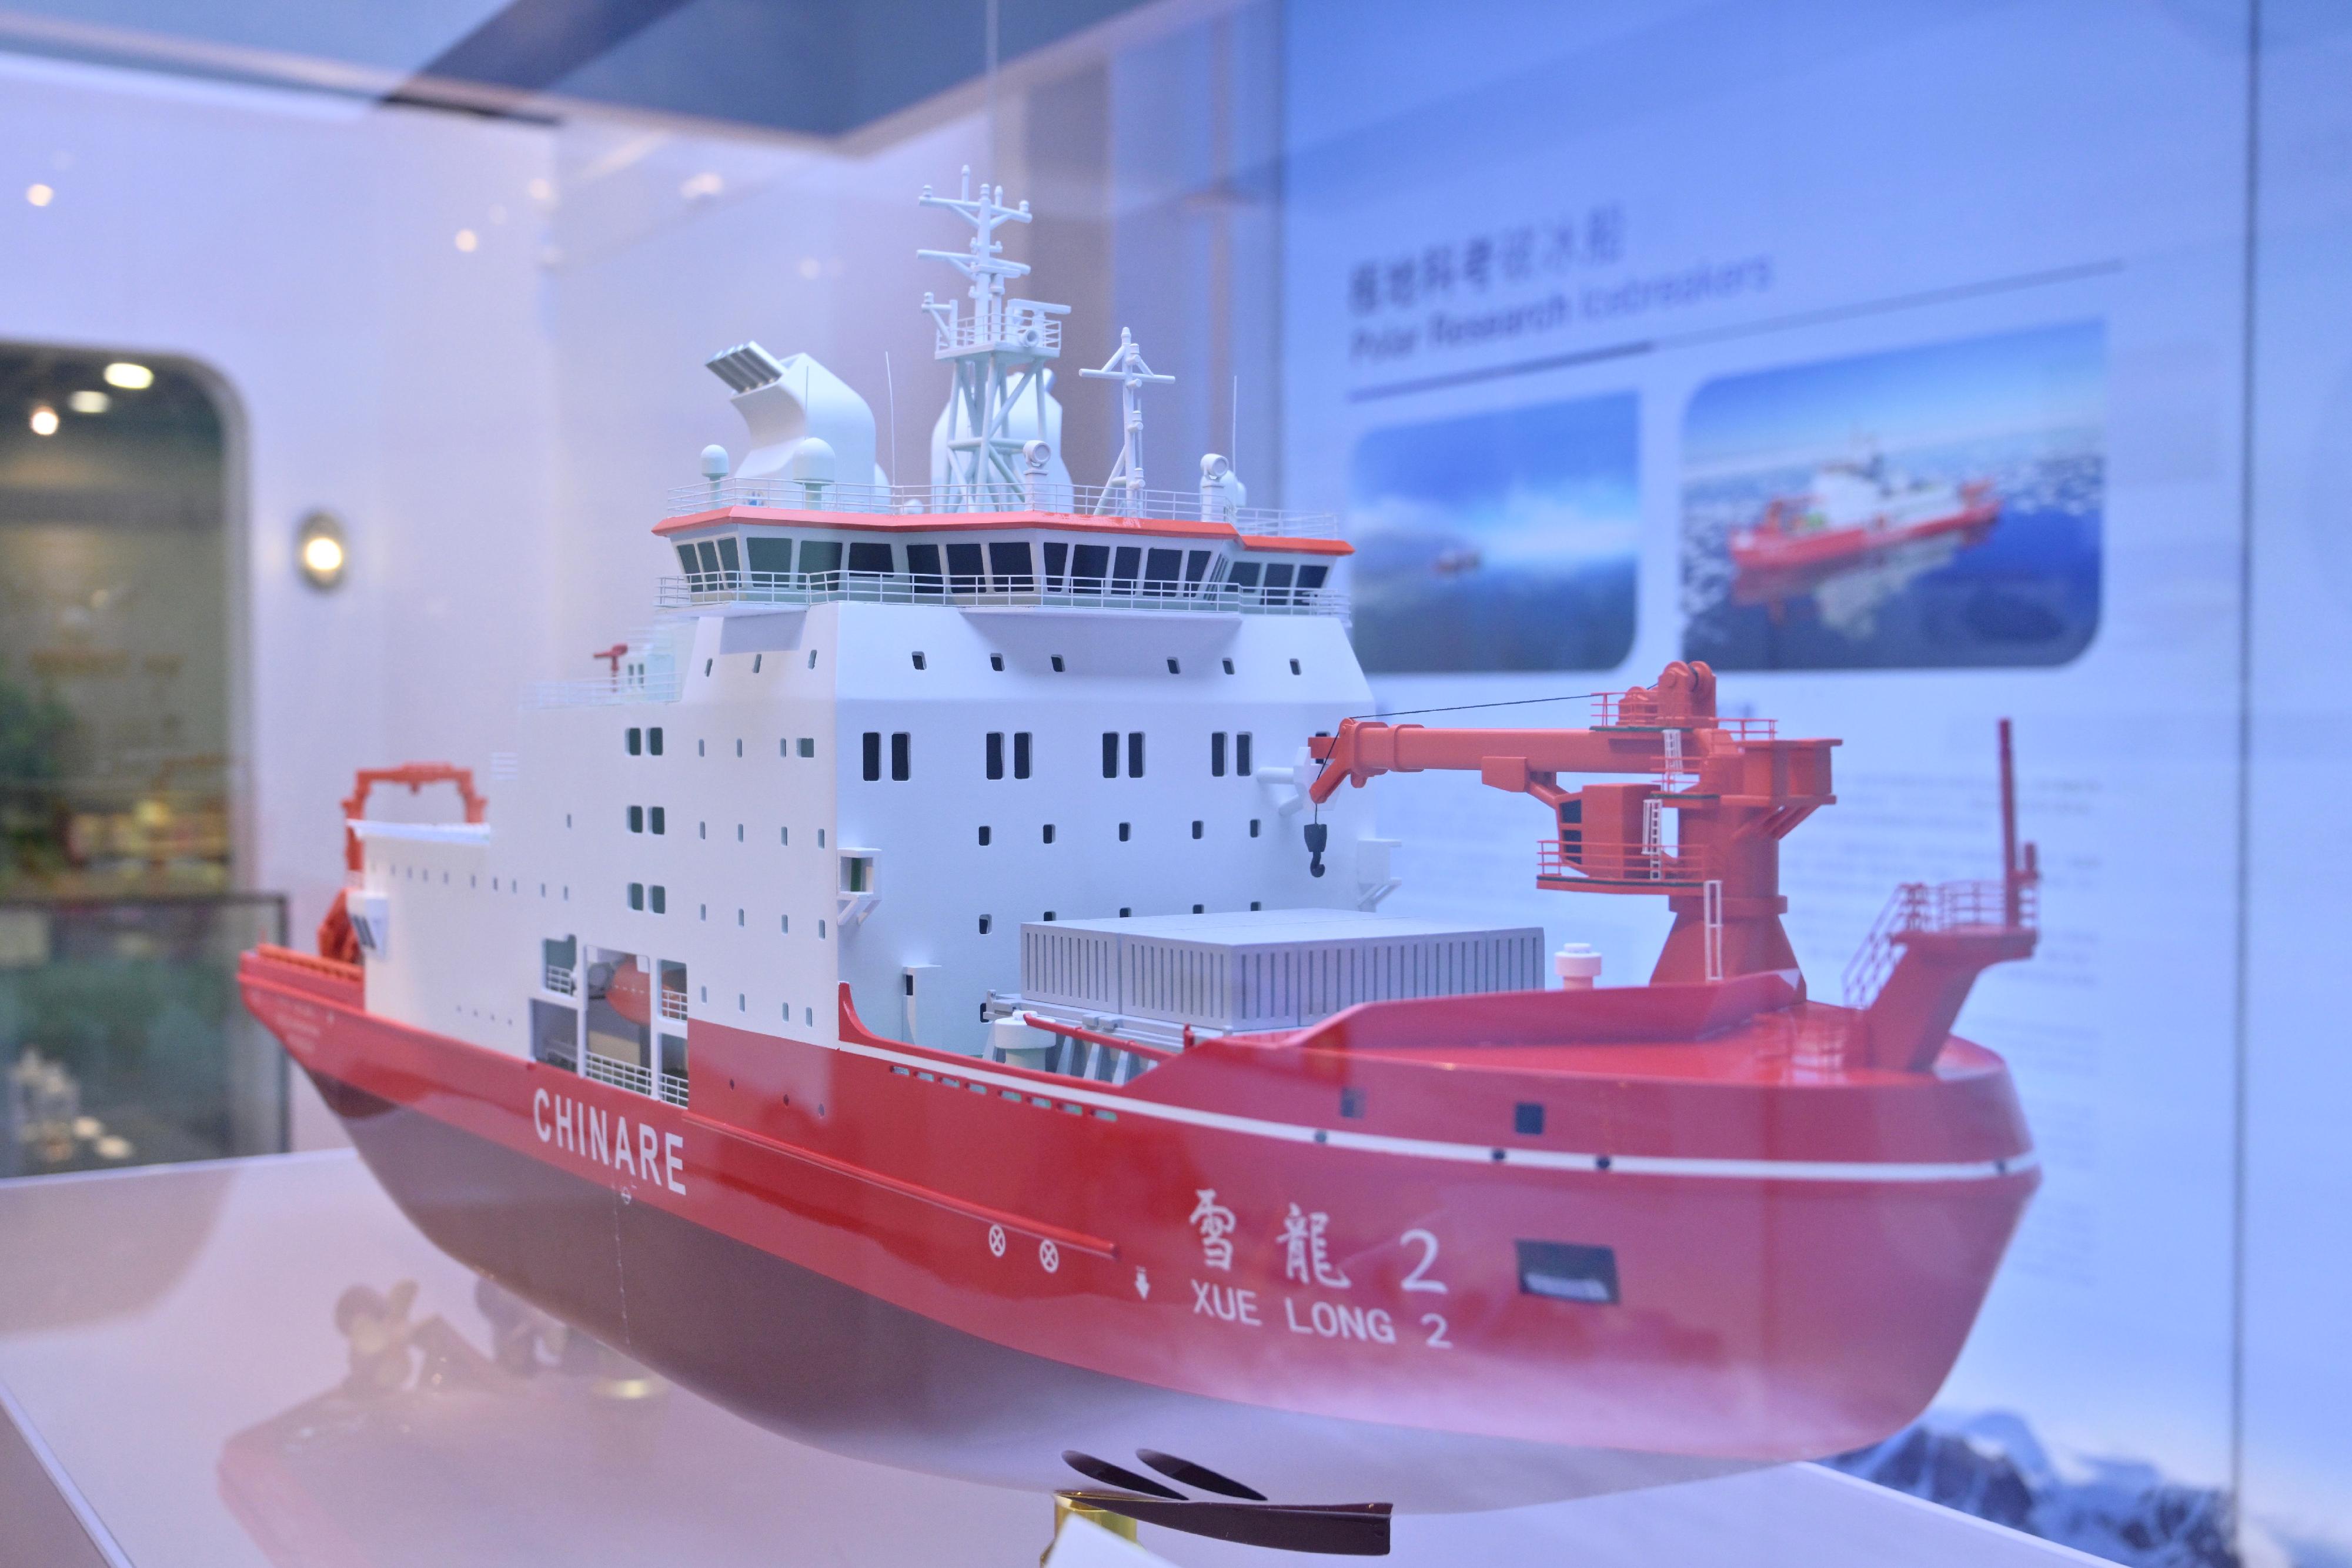 The Hong Kong Science Museum launched a new special exhibition, "Polar Research and Climate Change", today (March 18). Photo shows a 1:100 scale model of China's polar exploration icebreaker, Xuelong 2.